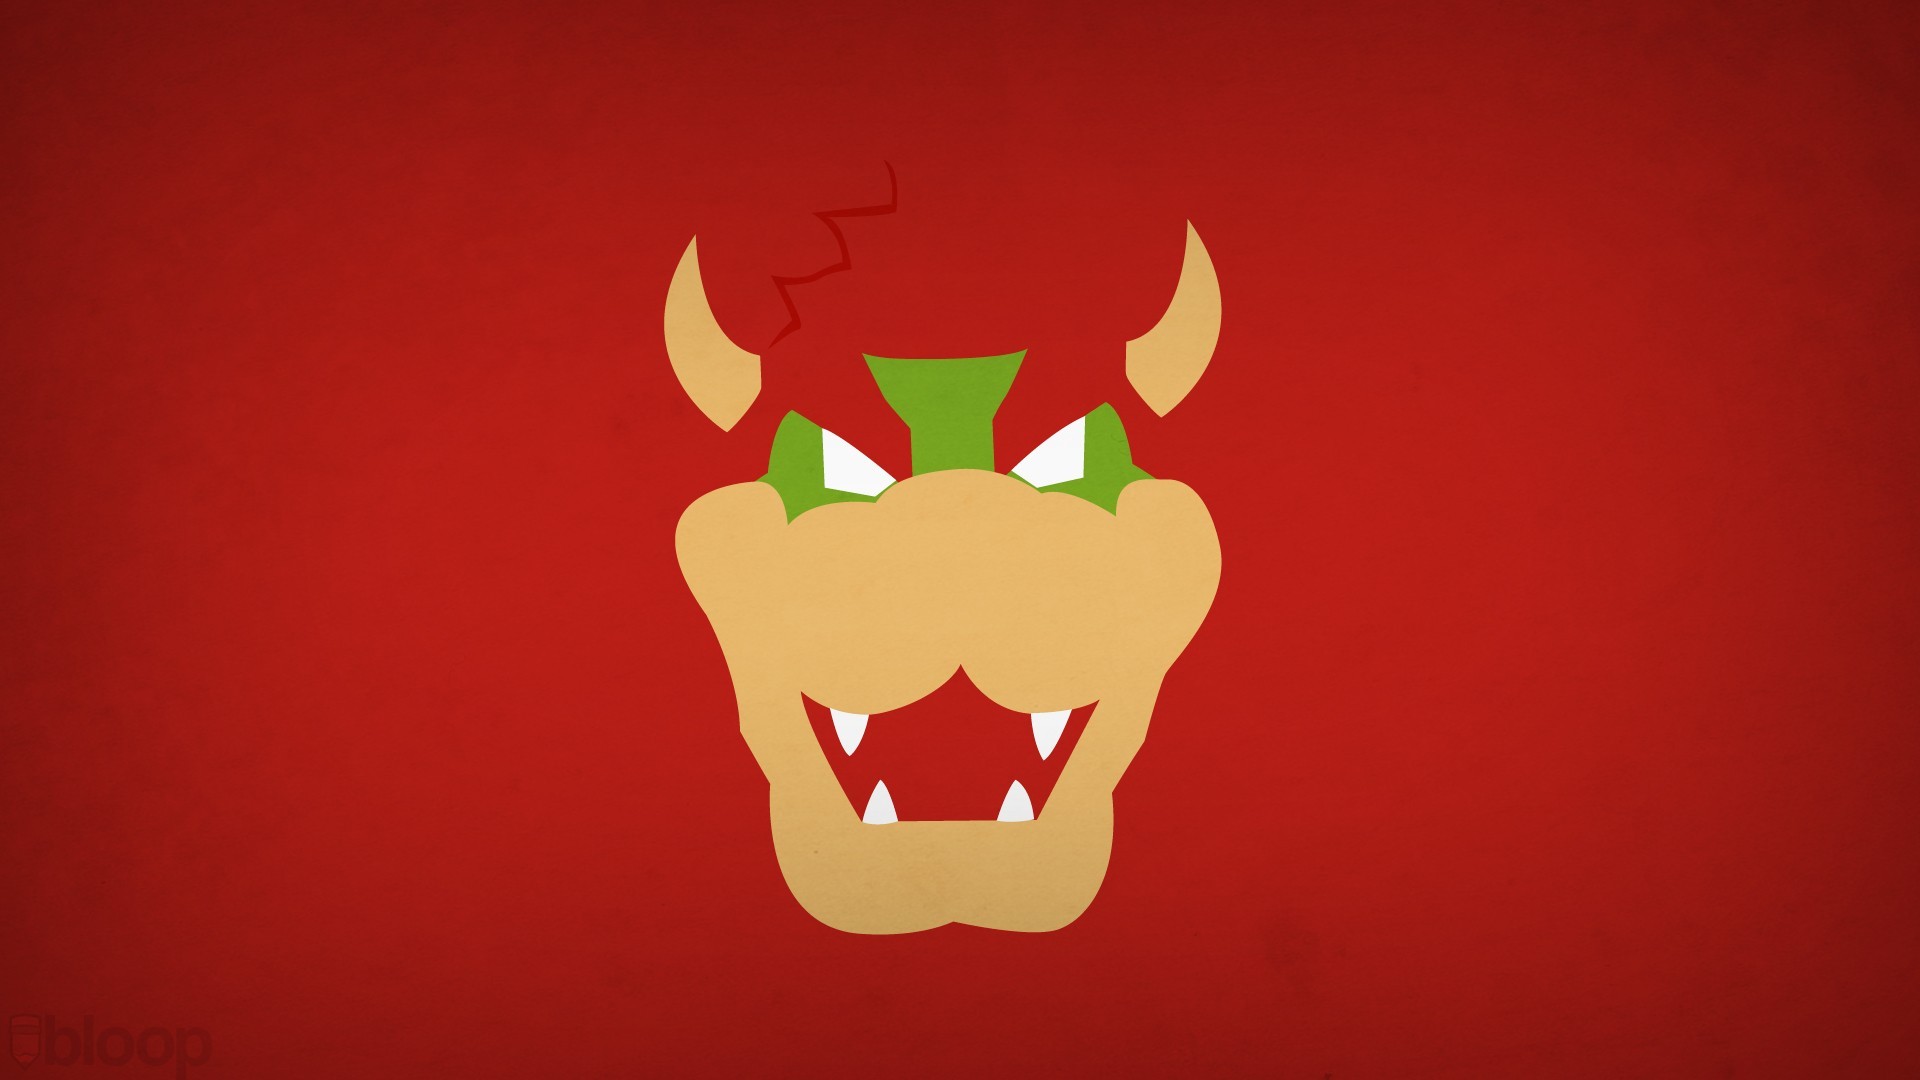 General 1920x1080 minimalism Mario Bros. Nintendo Blo0p villains Super Mario video games red background video game art Bowser video game characters fan art red